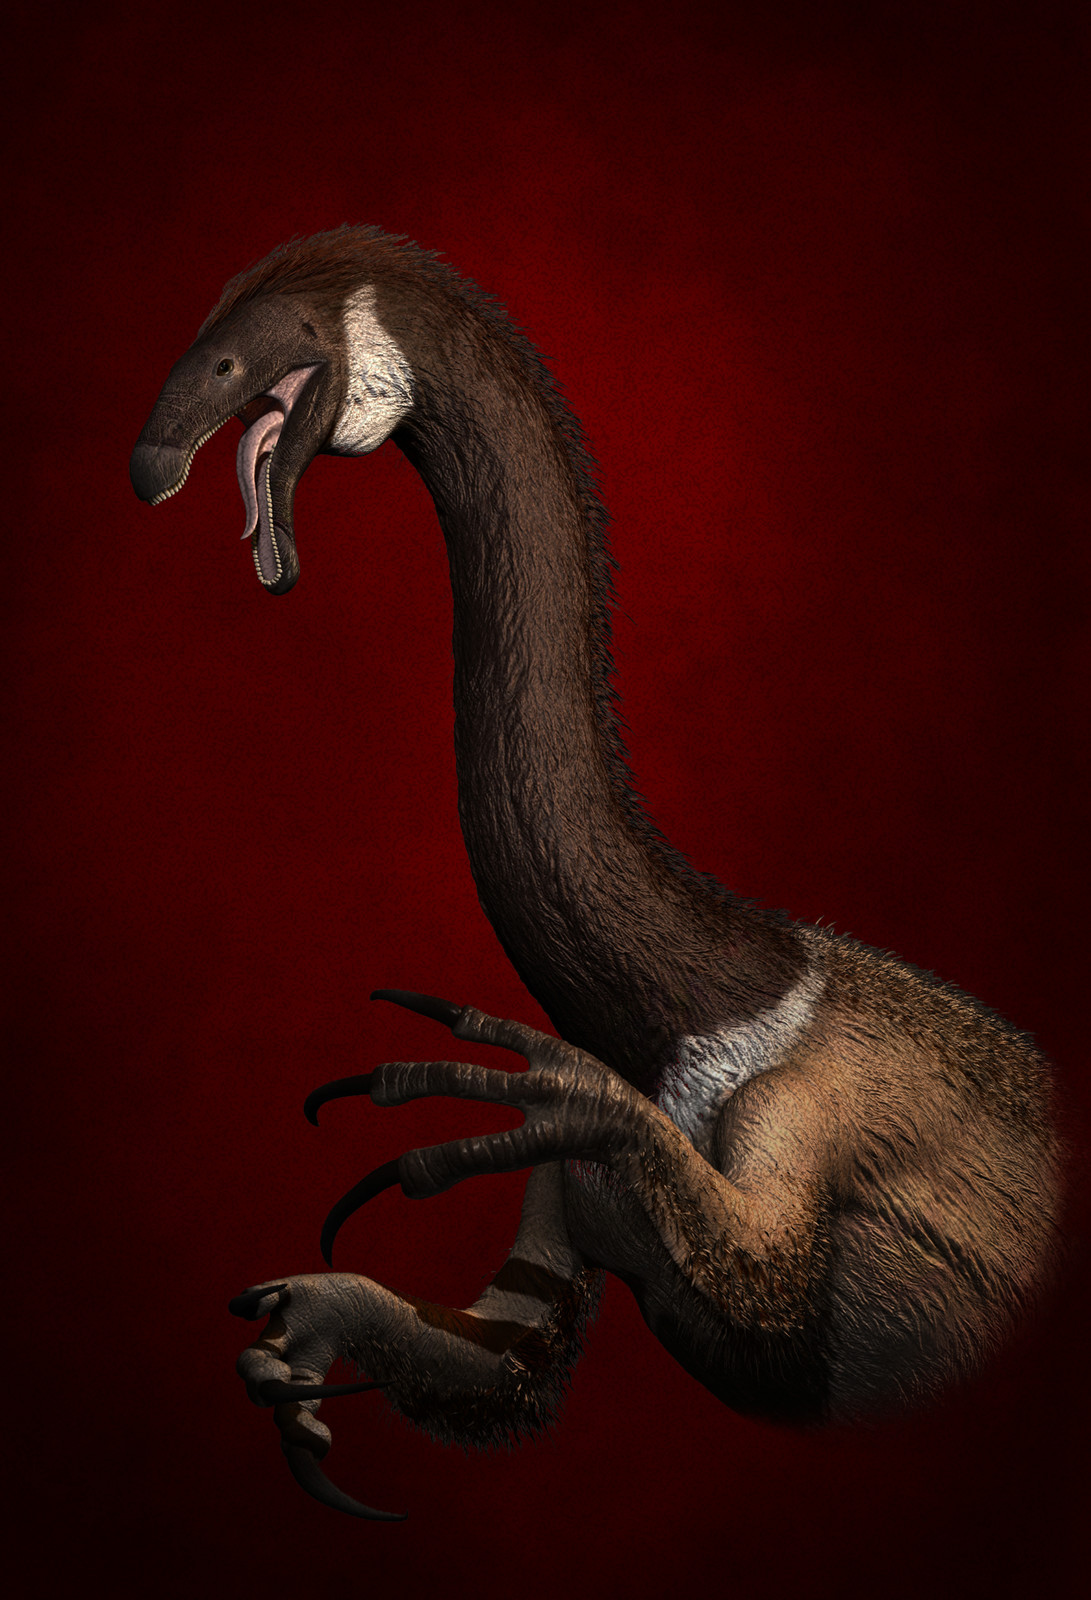 Day 29 The big bird that would give any would be predator Claws for concern, the one the only Therizinosaurus!
